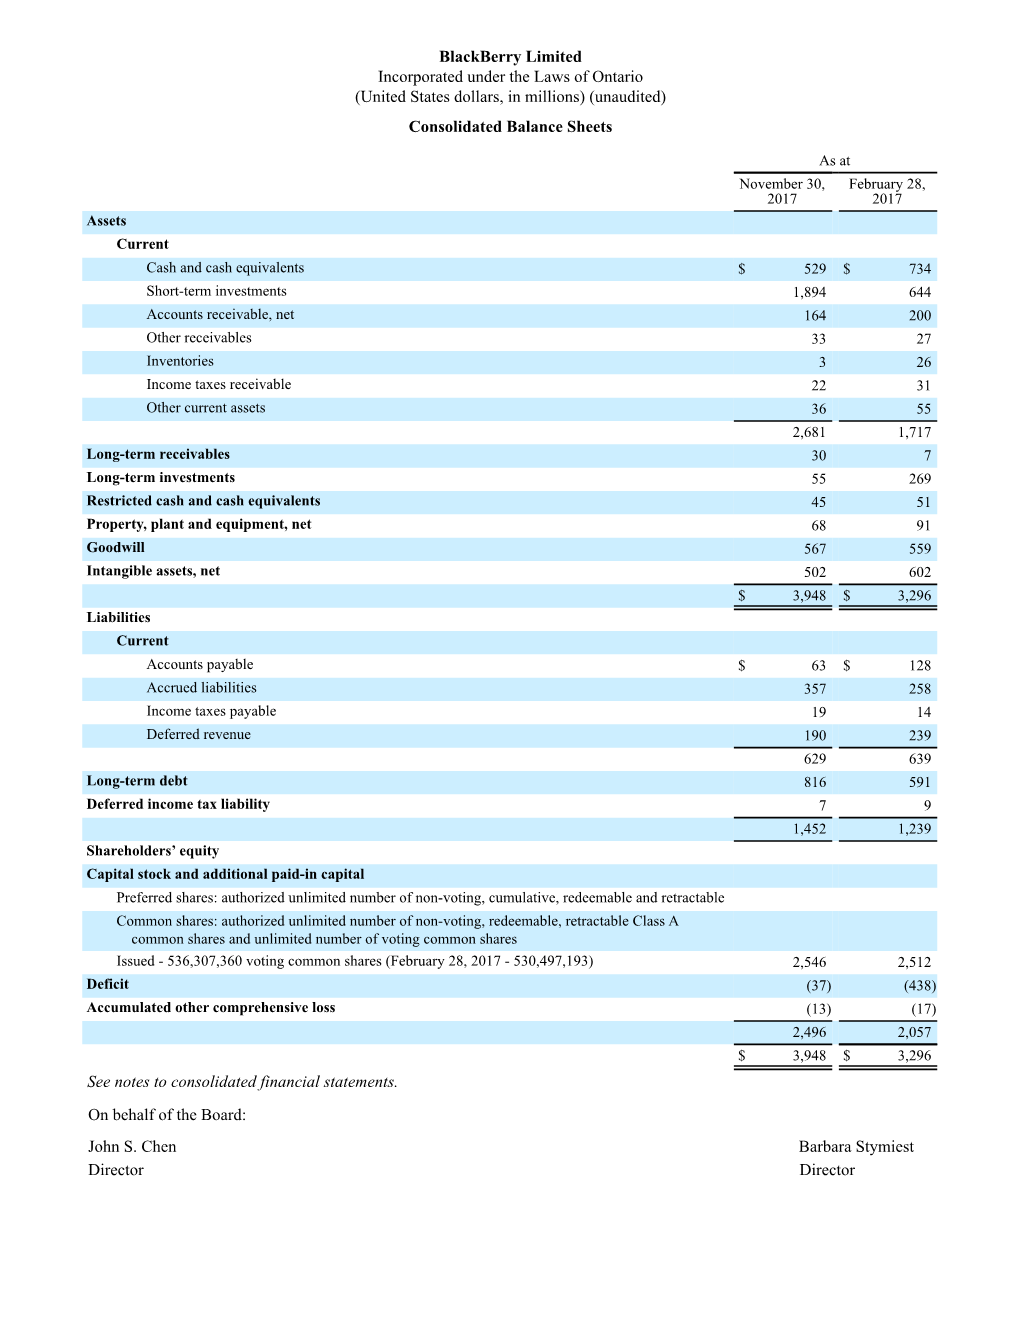 Blackberry Limited Incorporated Under the Laws of Ontario (United States Dollars, in Millions) (Unaudited) Consolidated Balance Sheets